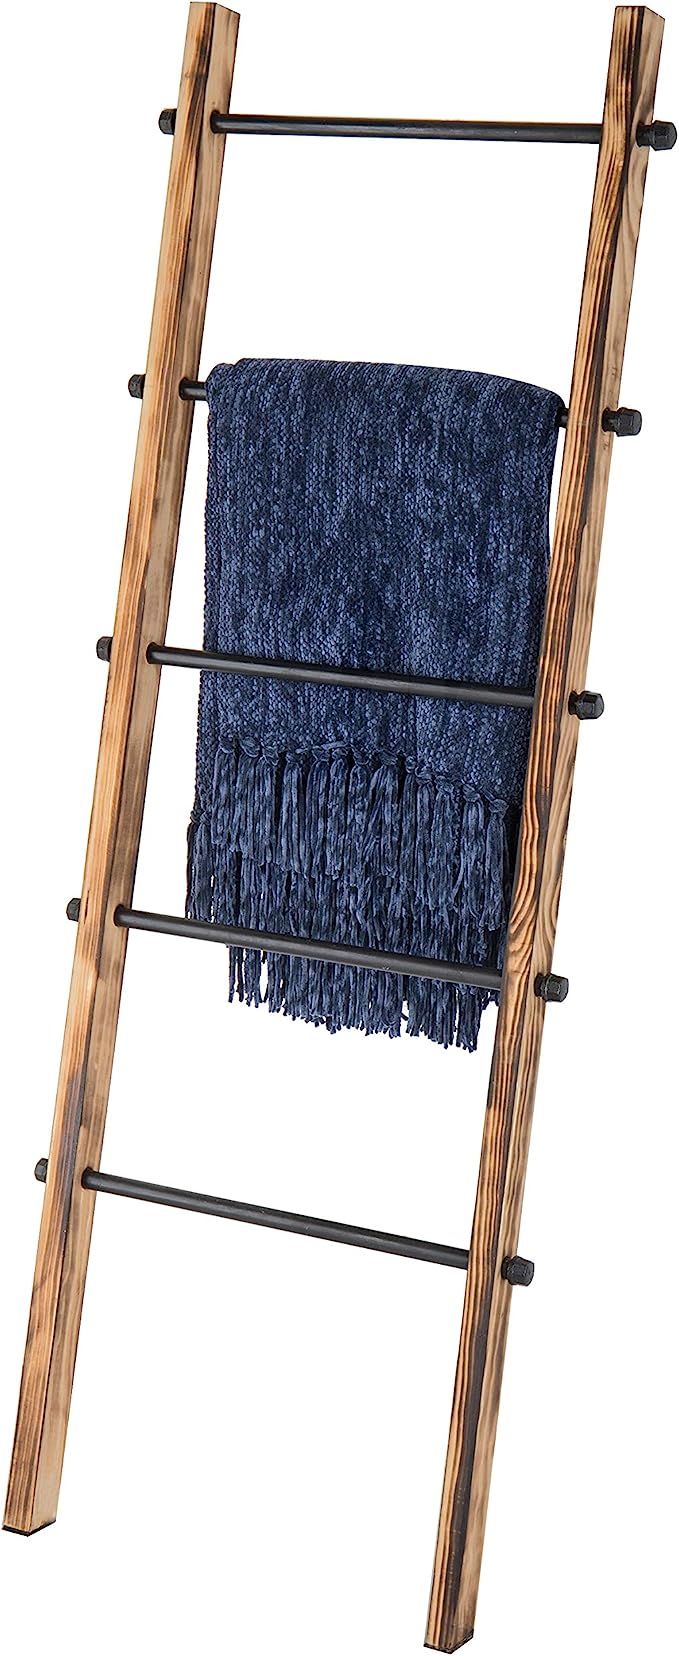 MyGift 5-ft Urban Rustic Wall-Leaning Burnt Wood & Metal Quilt Blanket and Towel Storage Ladder S... | Amazon (US)